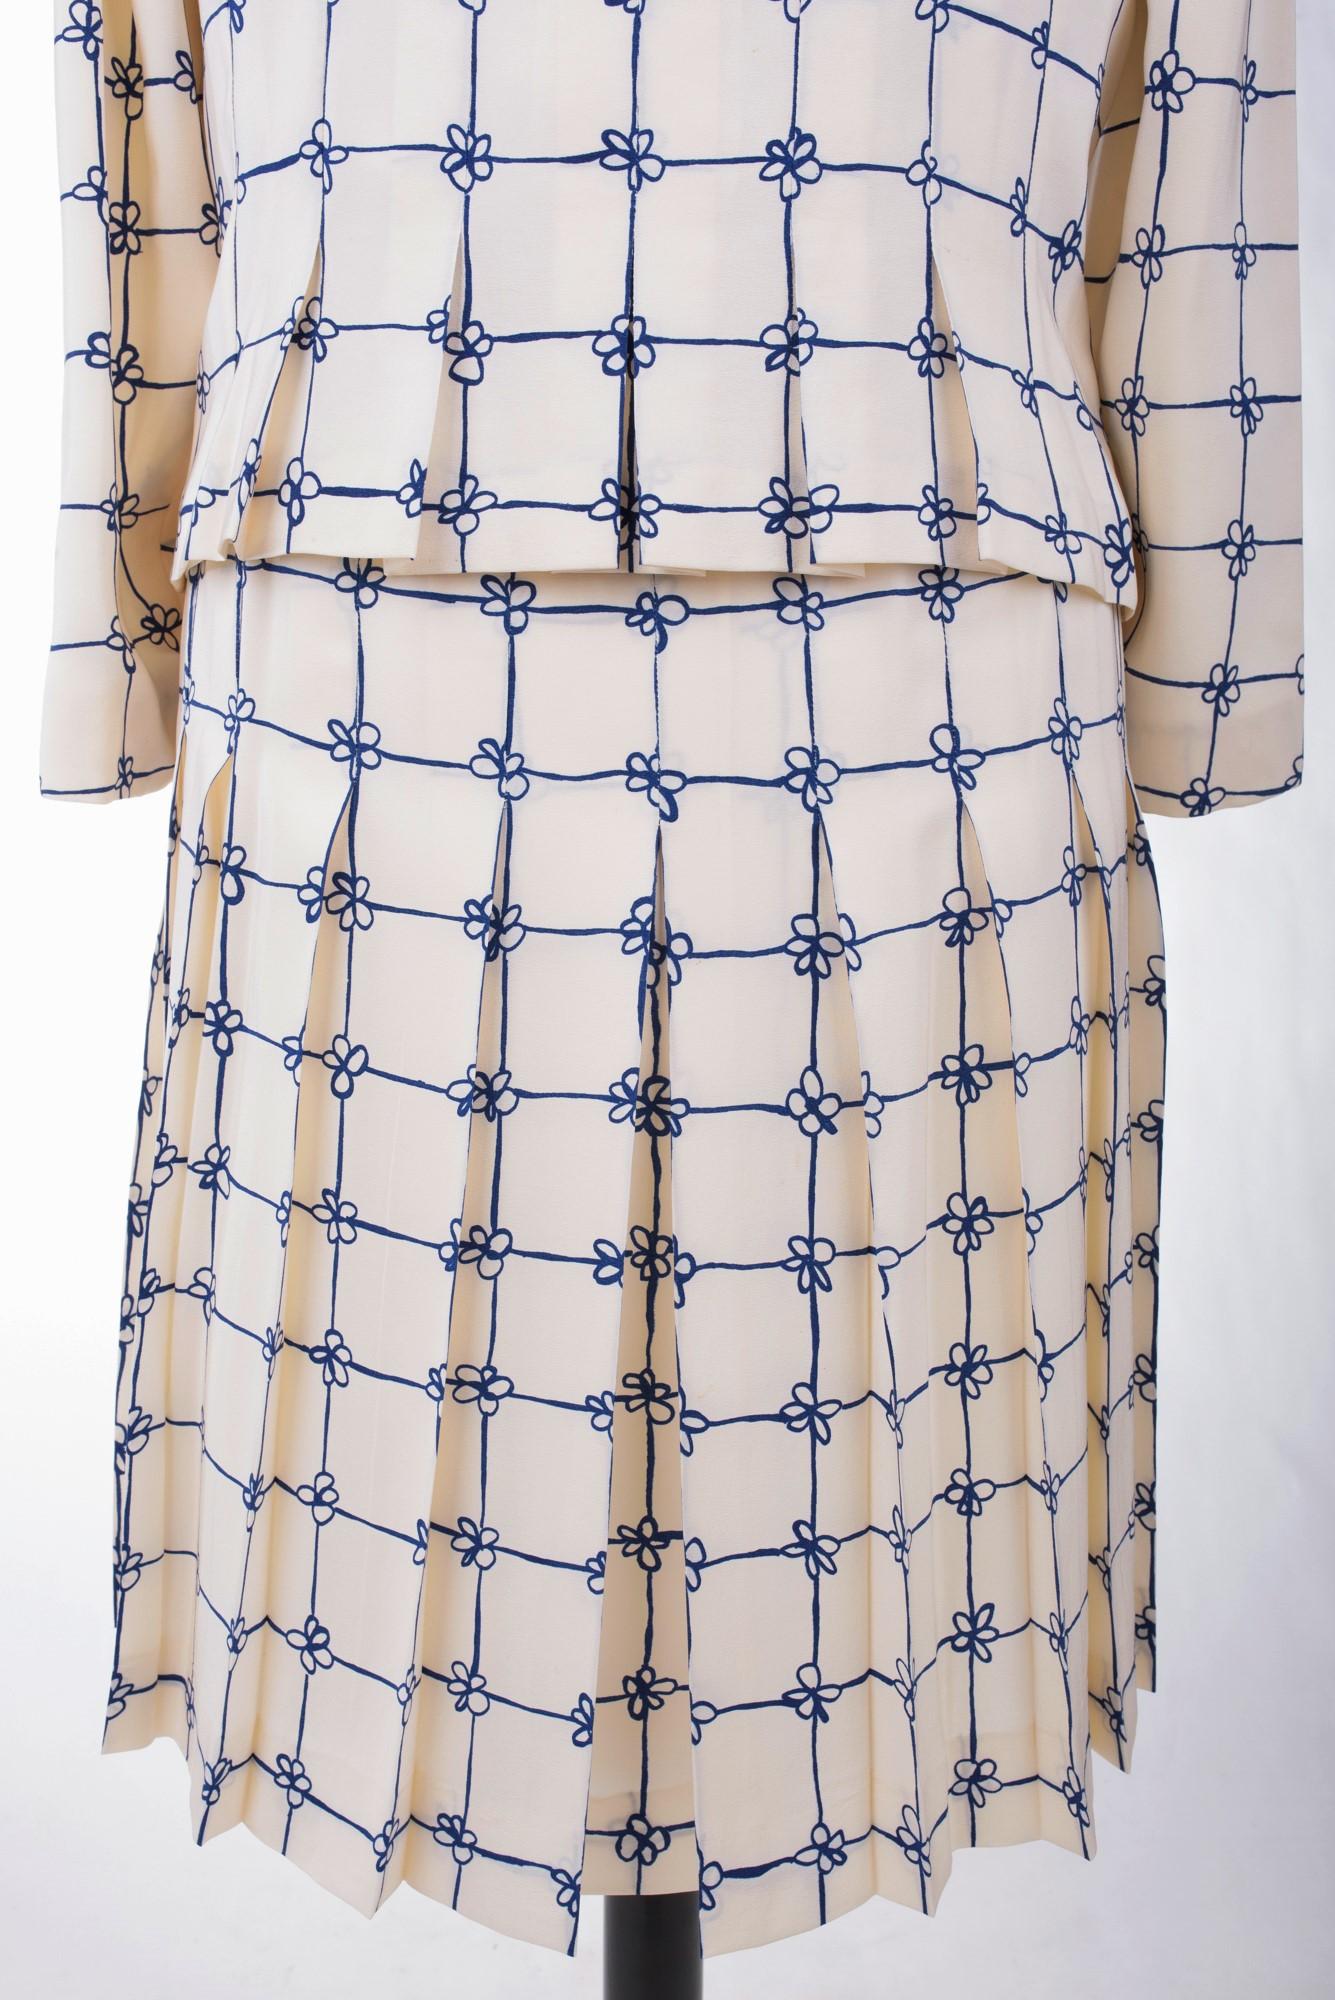 A Mademoiselle Chanel Haute Couture Printed Crepe dress Number 61476 Circa 1960 8